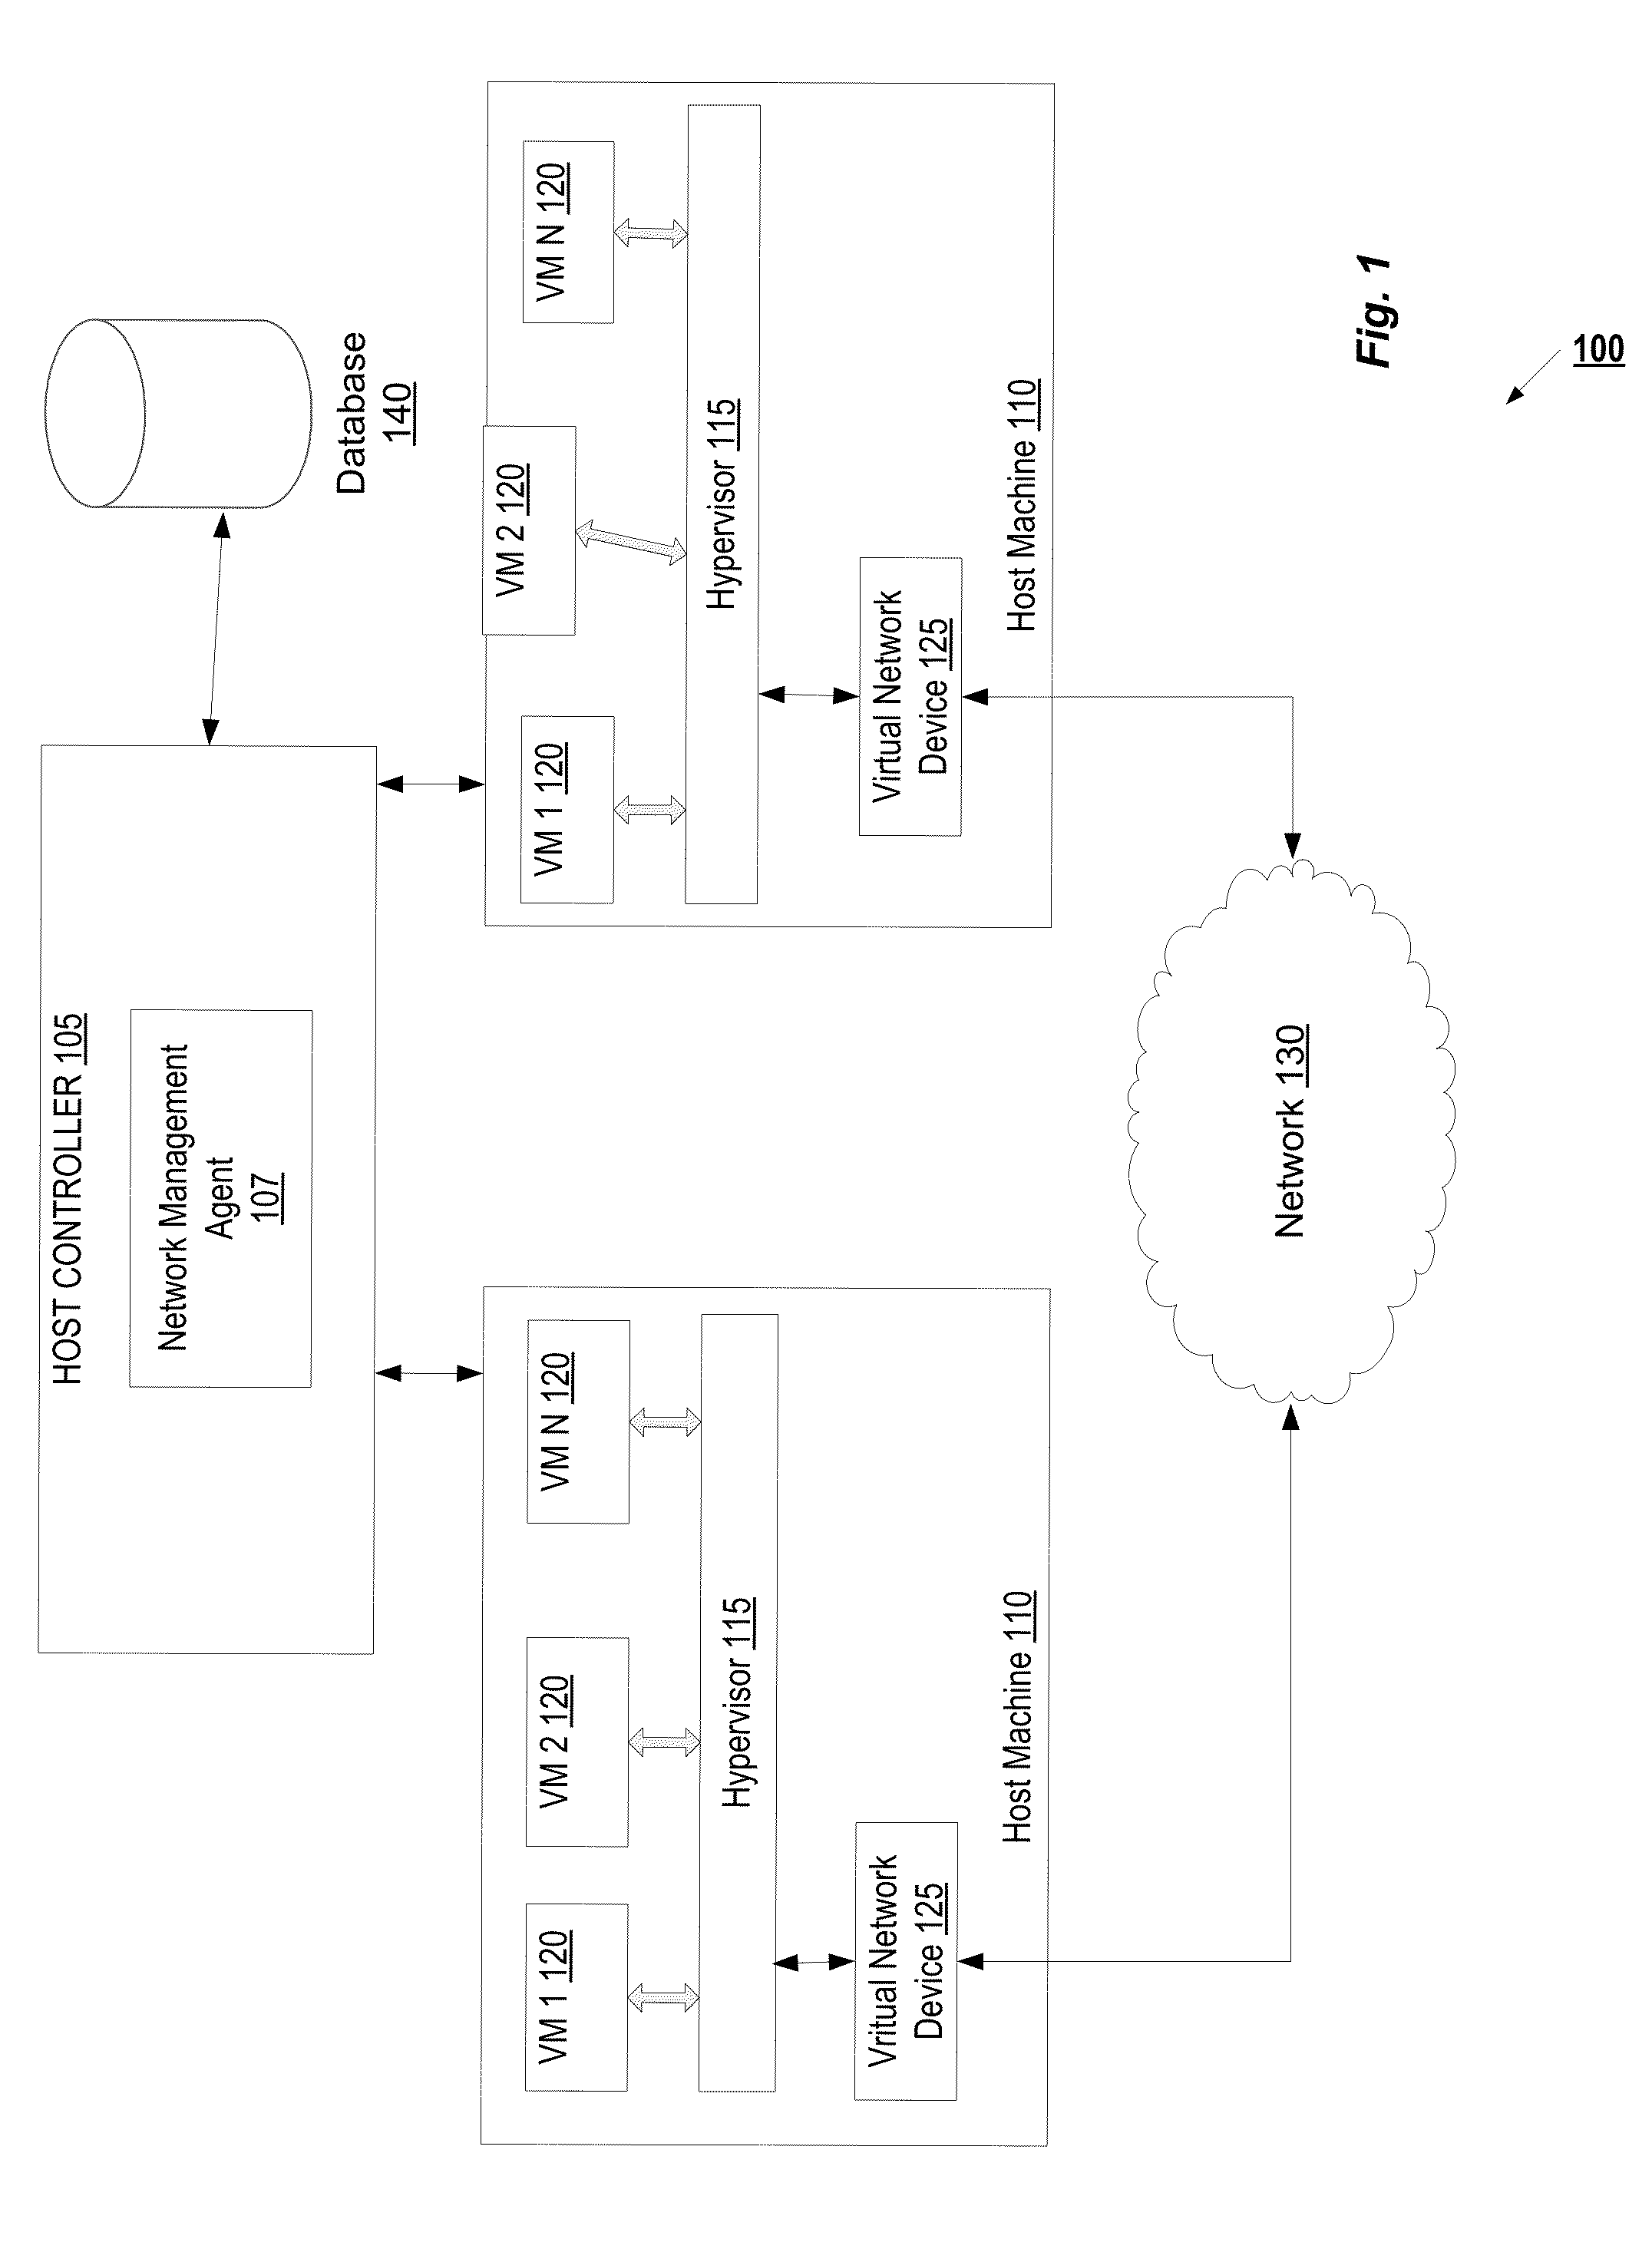 Mechanism for managed network filter/forward programming in a virtualization system